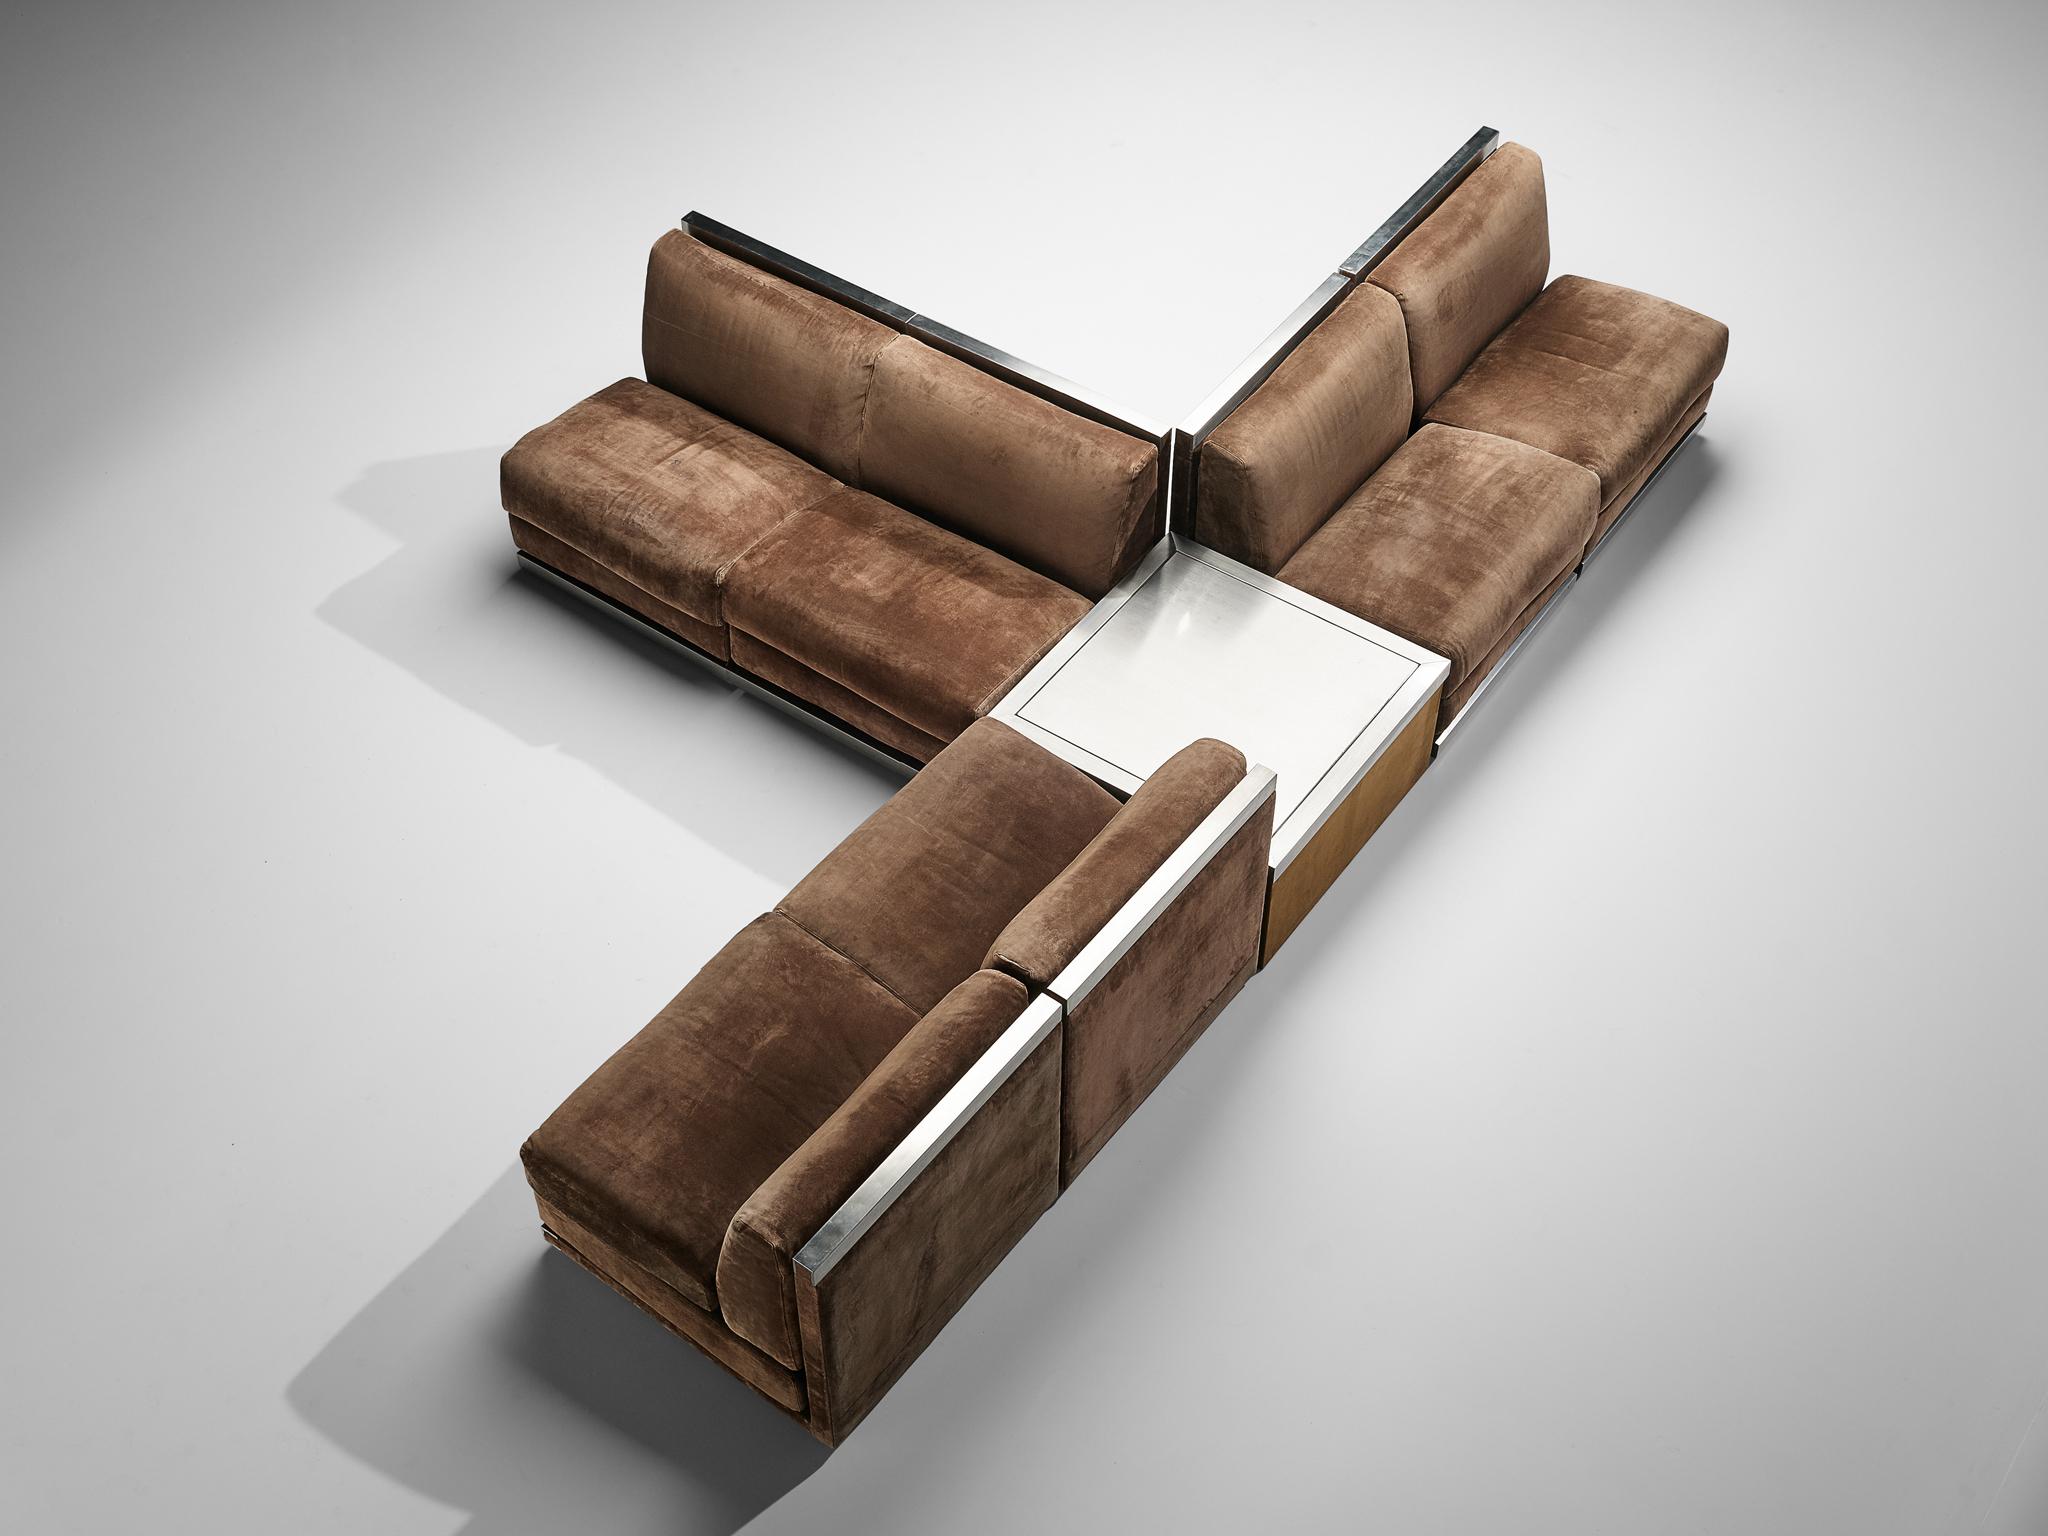 Sectional sofa, brown suede upholstery, brushed steel, Italy, 1970s

Large Postmodern modular sofa, consisting of six straight seating elements and a side table. A perfect piece to place in a large room as it can be positioned to your own liking.